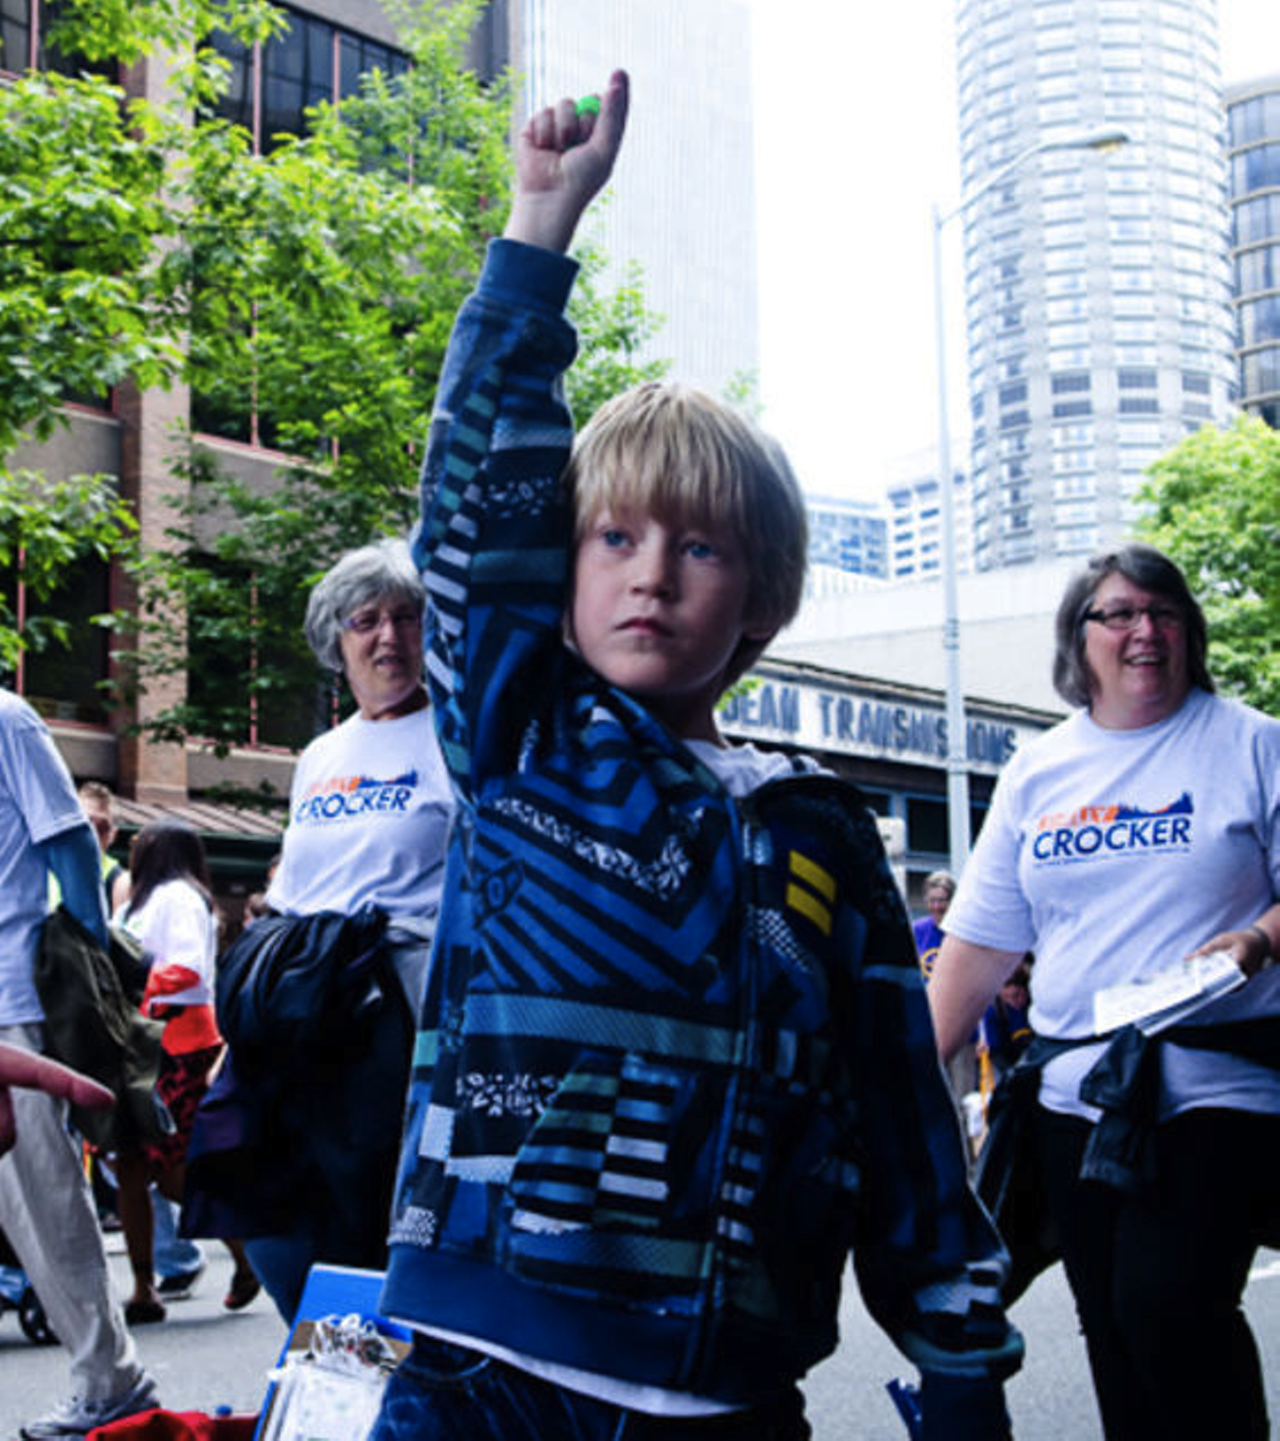 A young protester in Seattle, Washington